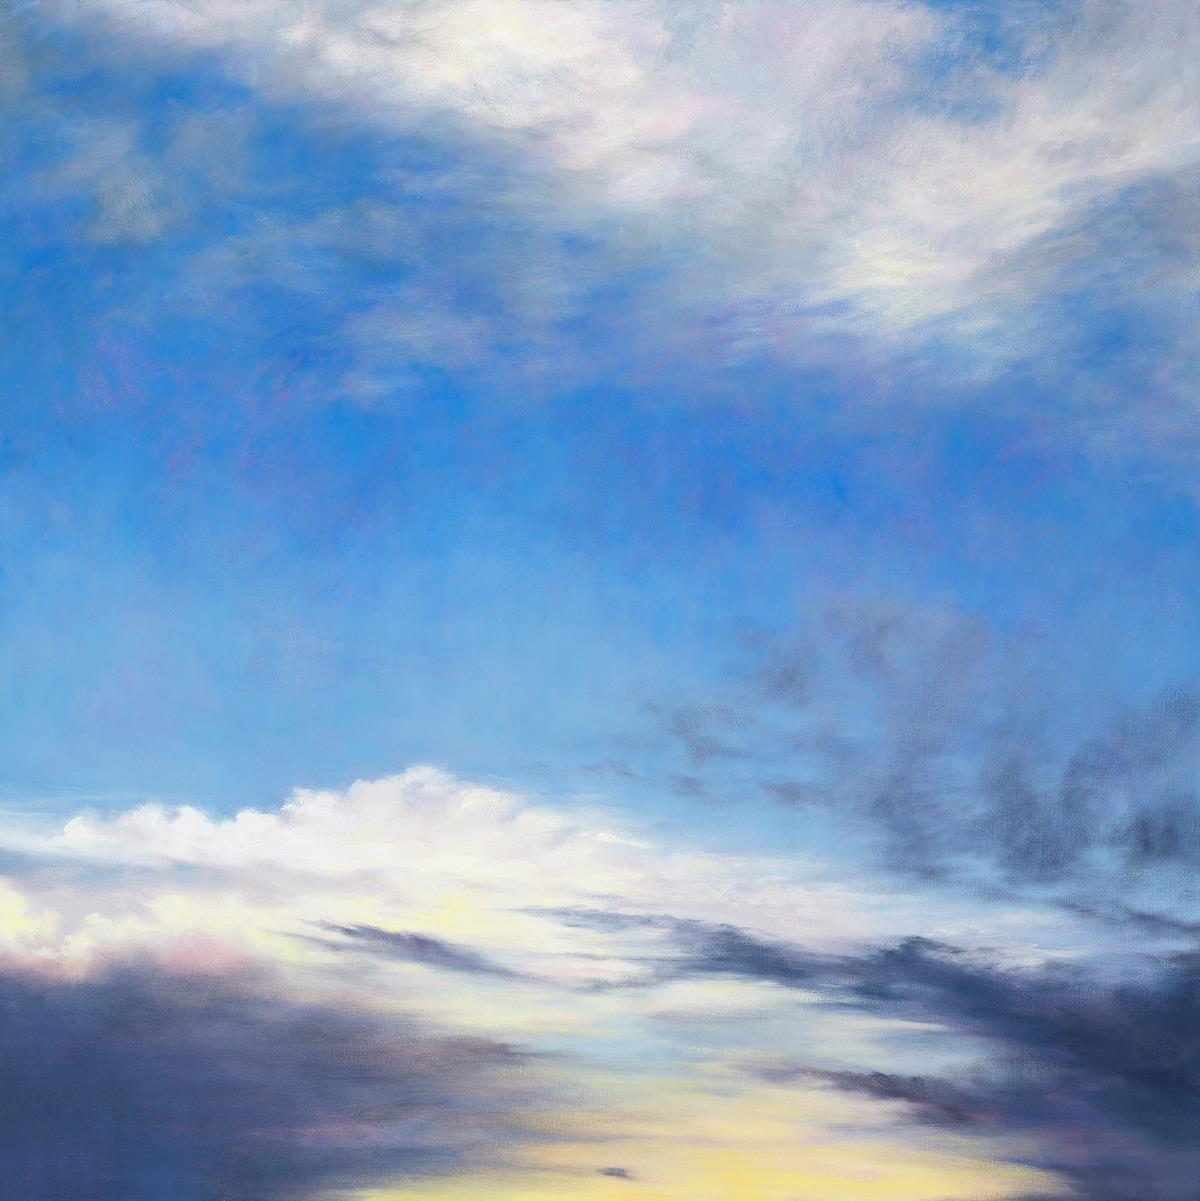 Breathing Space, a sky painting by Corinne Loxton